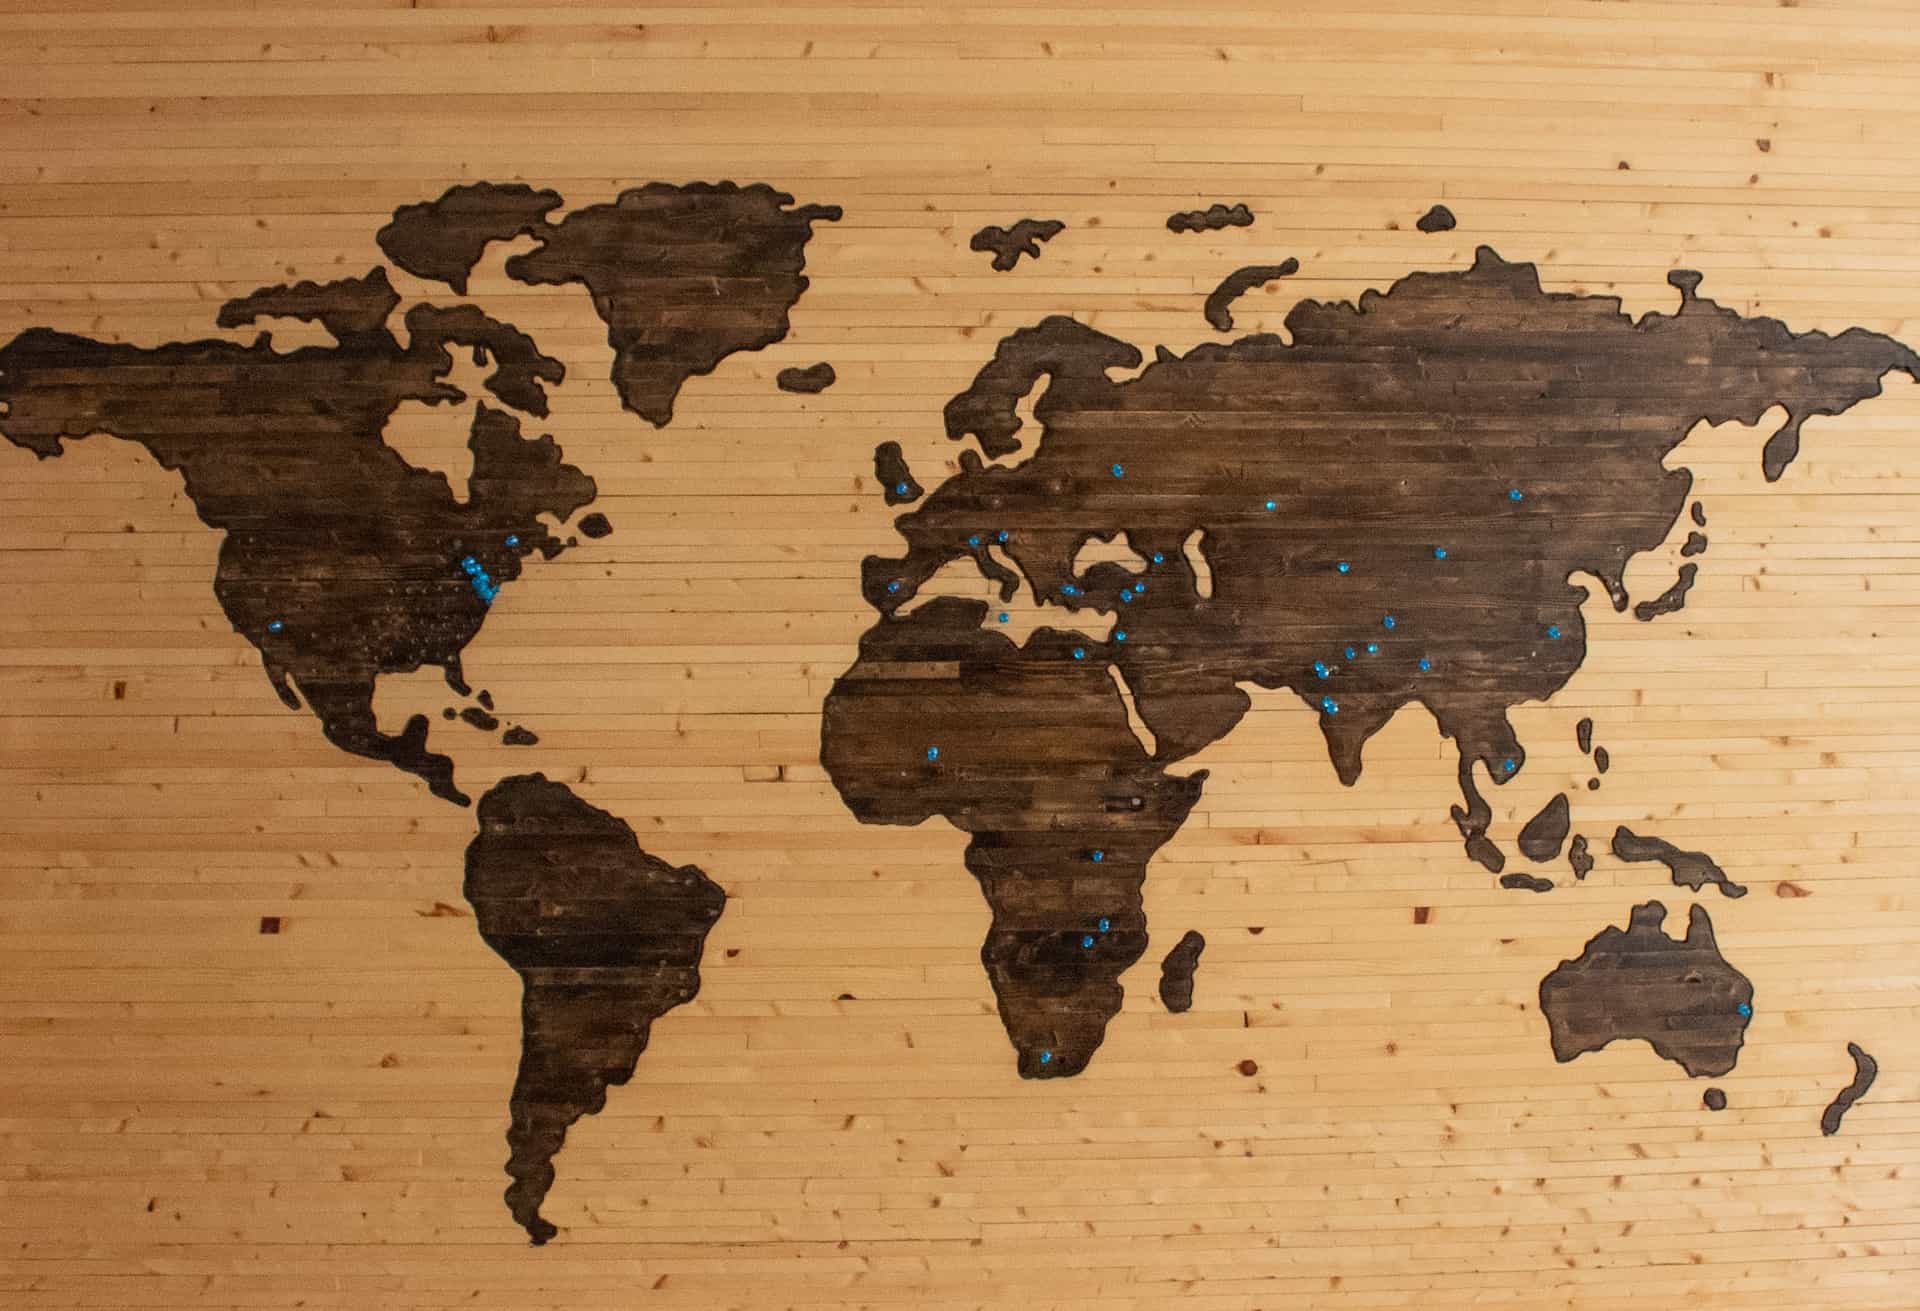 A brown wooden map of the world with blue pins marking locations.